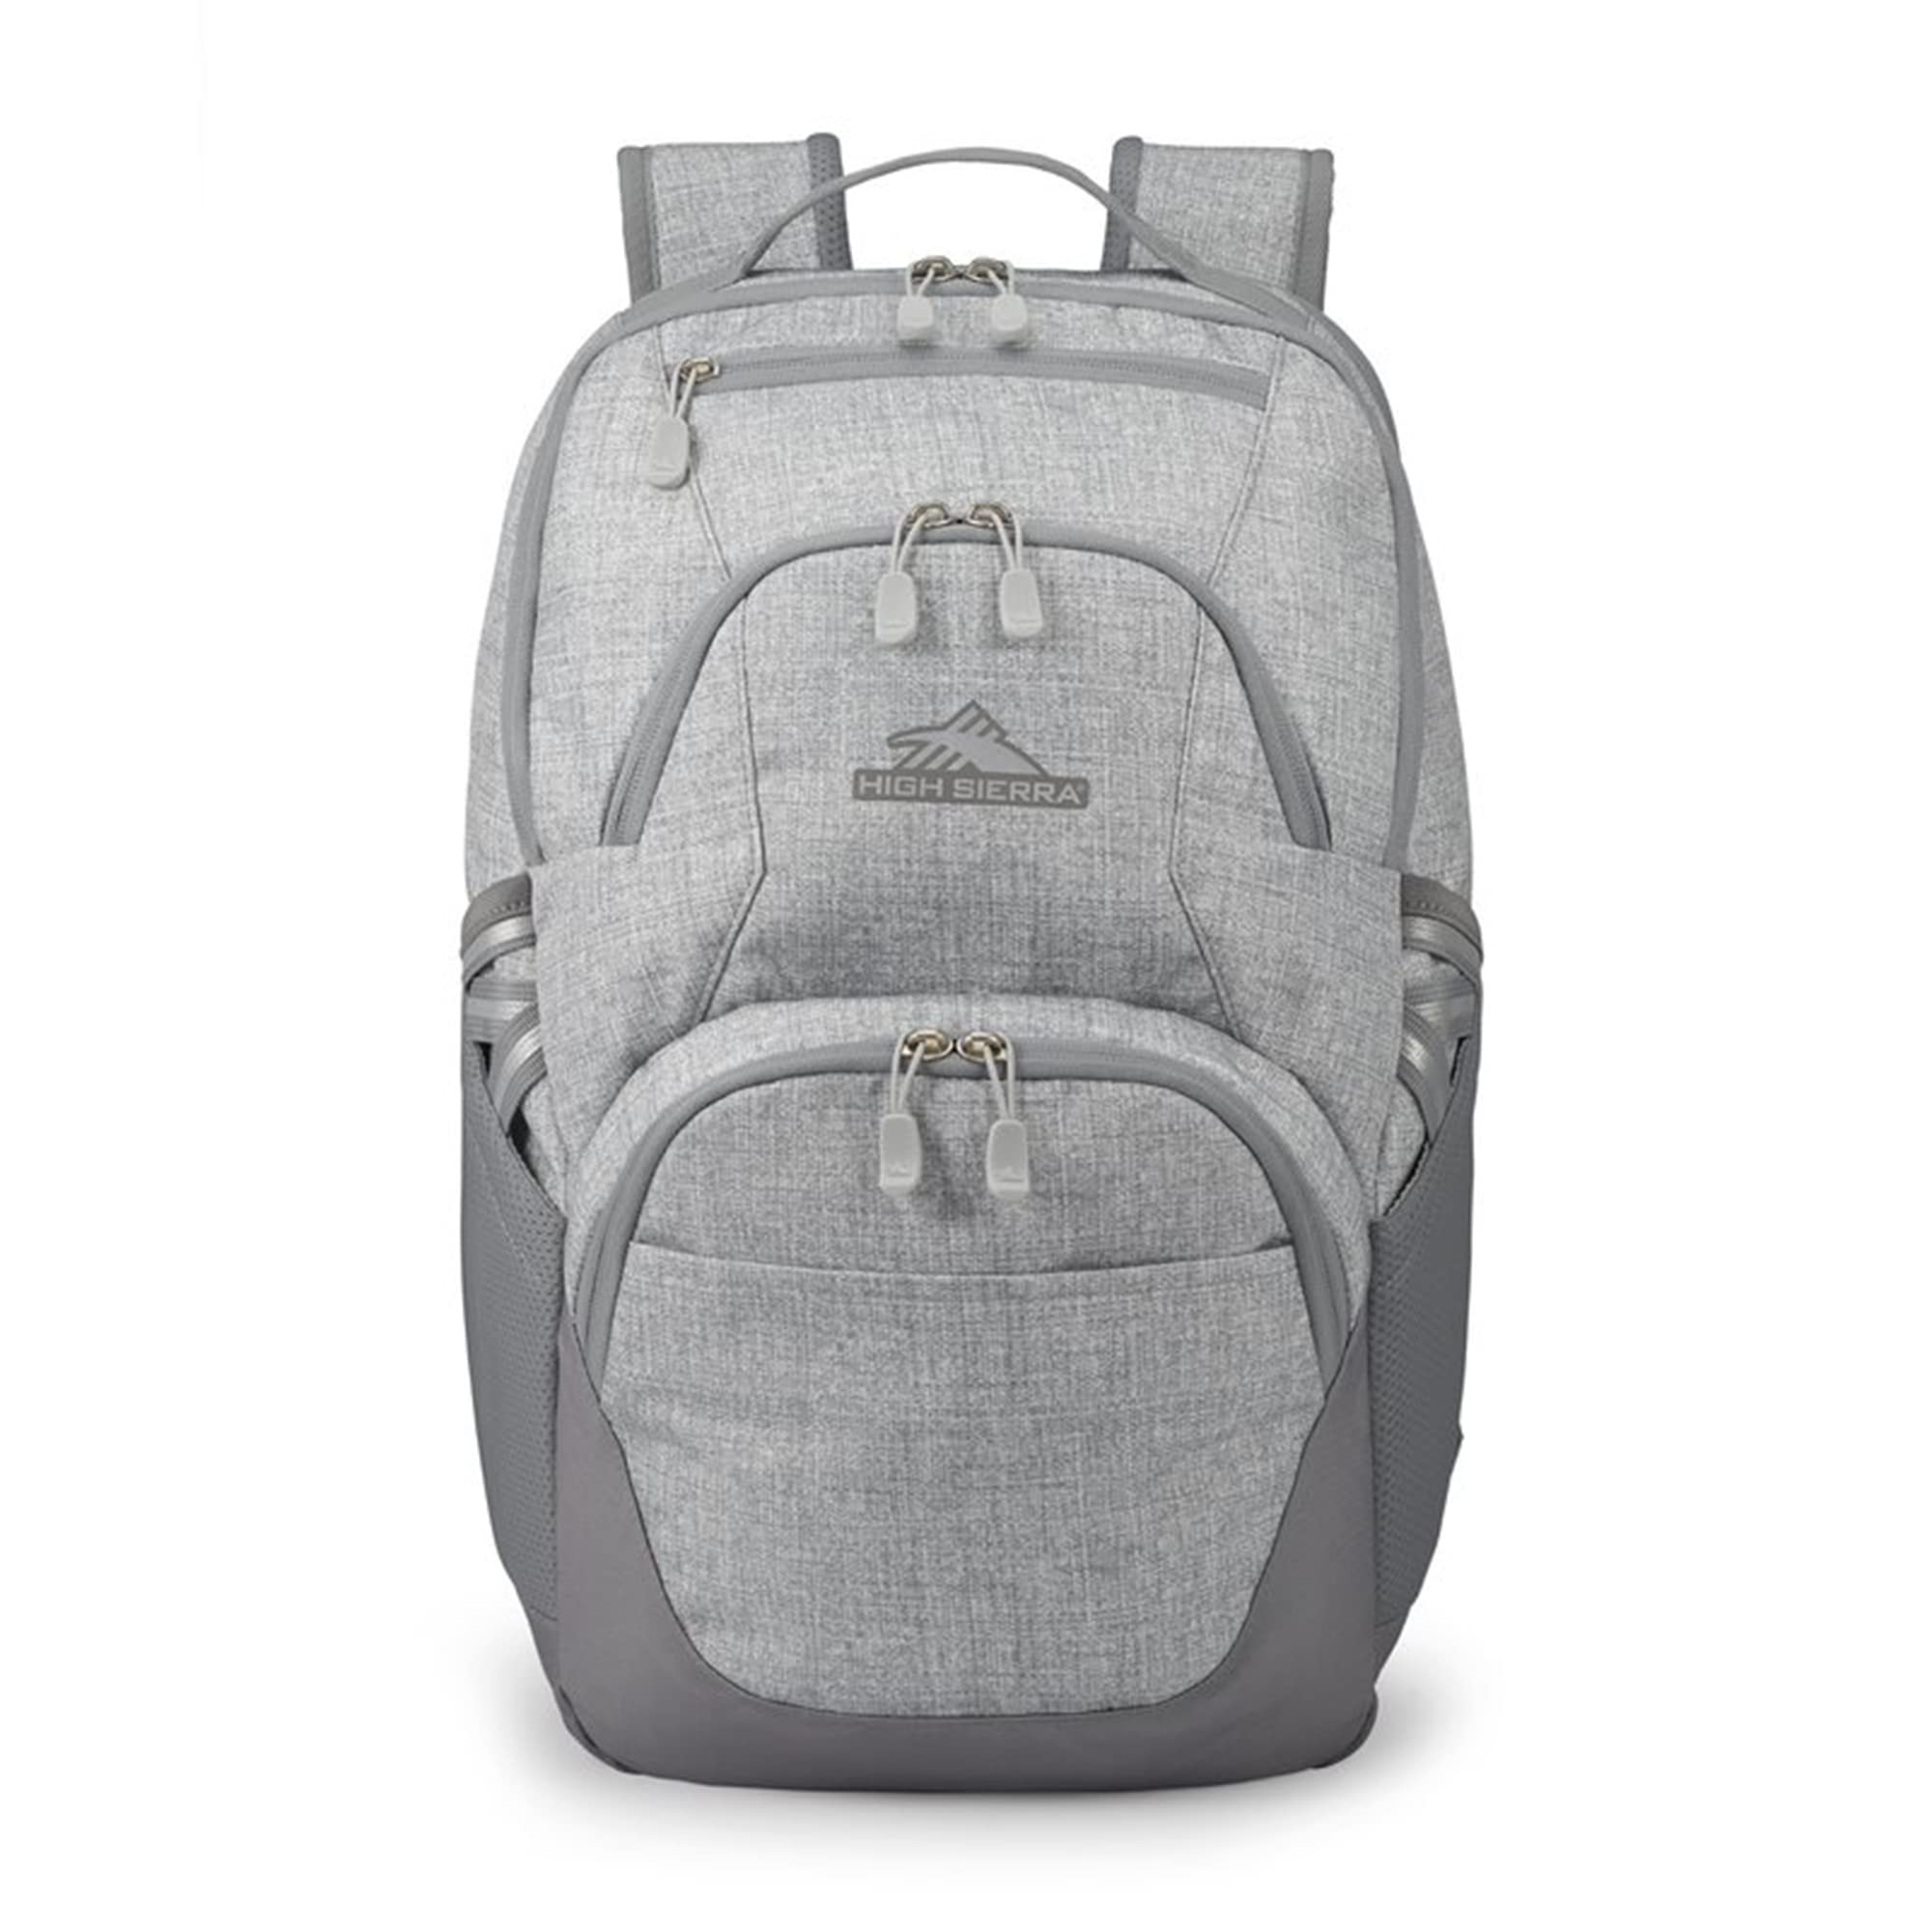 High Sierra Swoop SG Backpack, Travel or Work Laptop Bookbag with Drop Protection Pocket, and Tablet Sleeve, One Size, Silver Heather